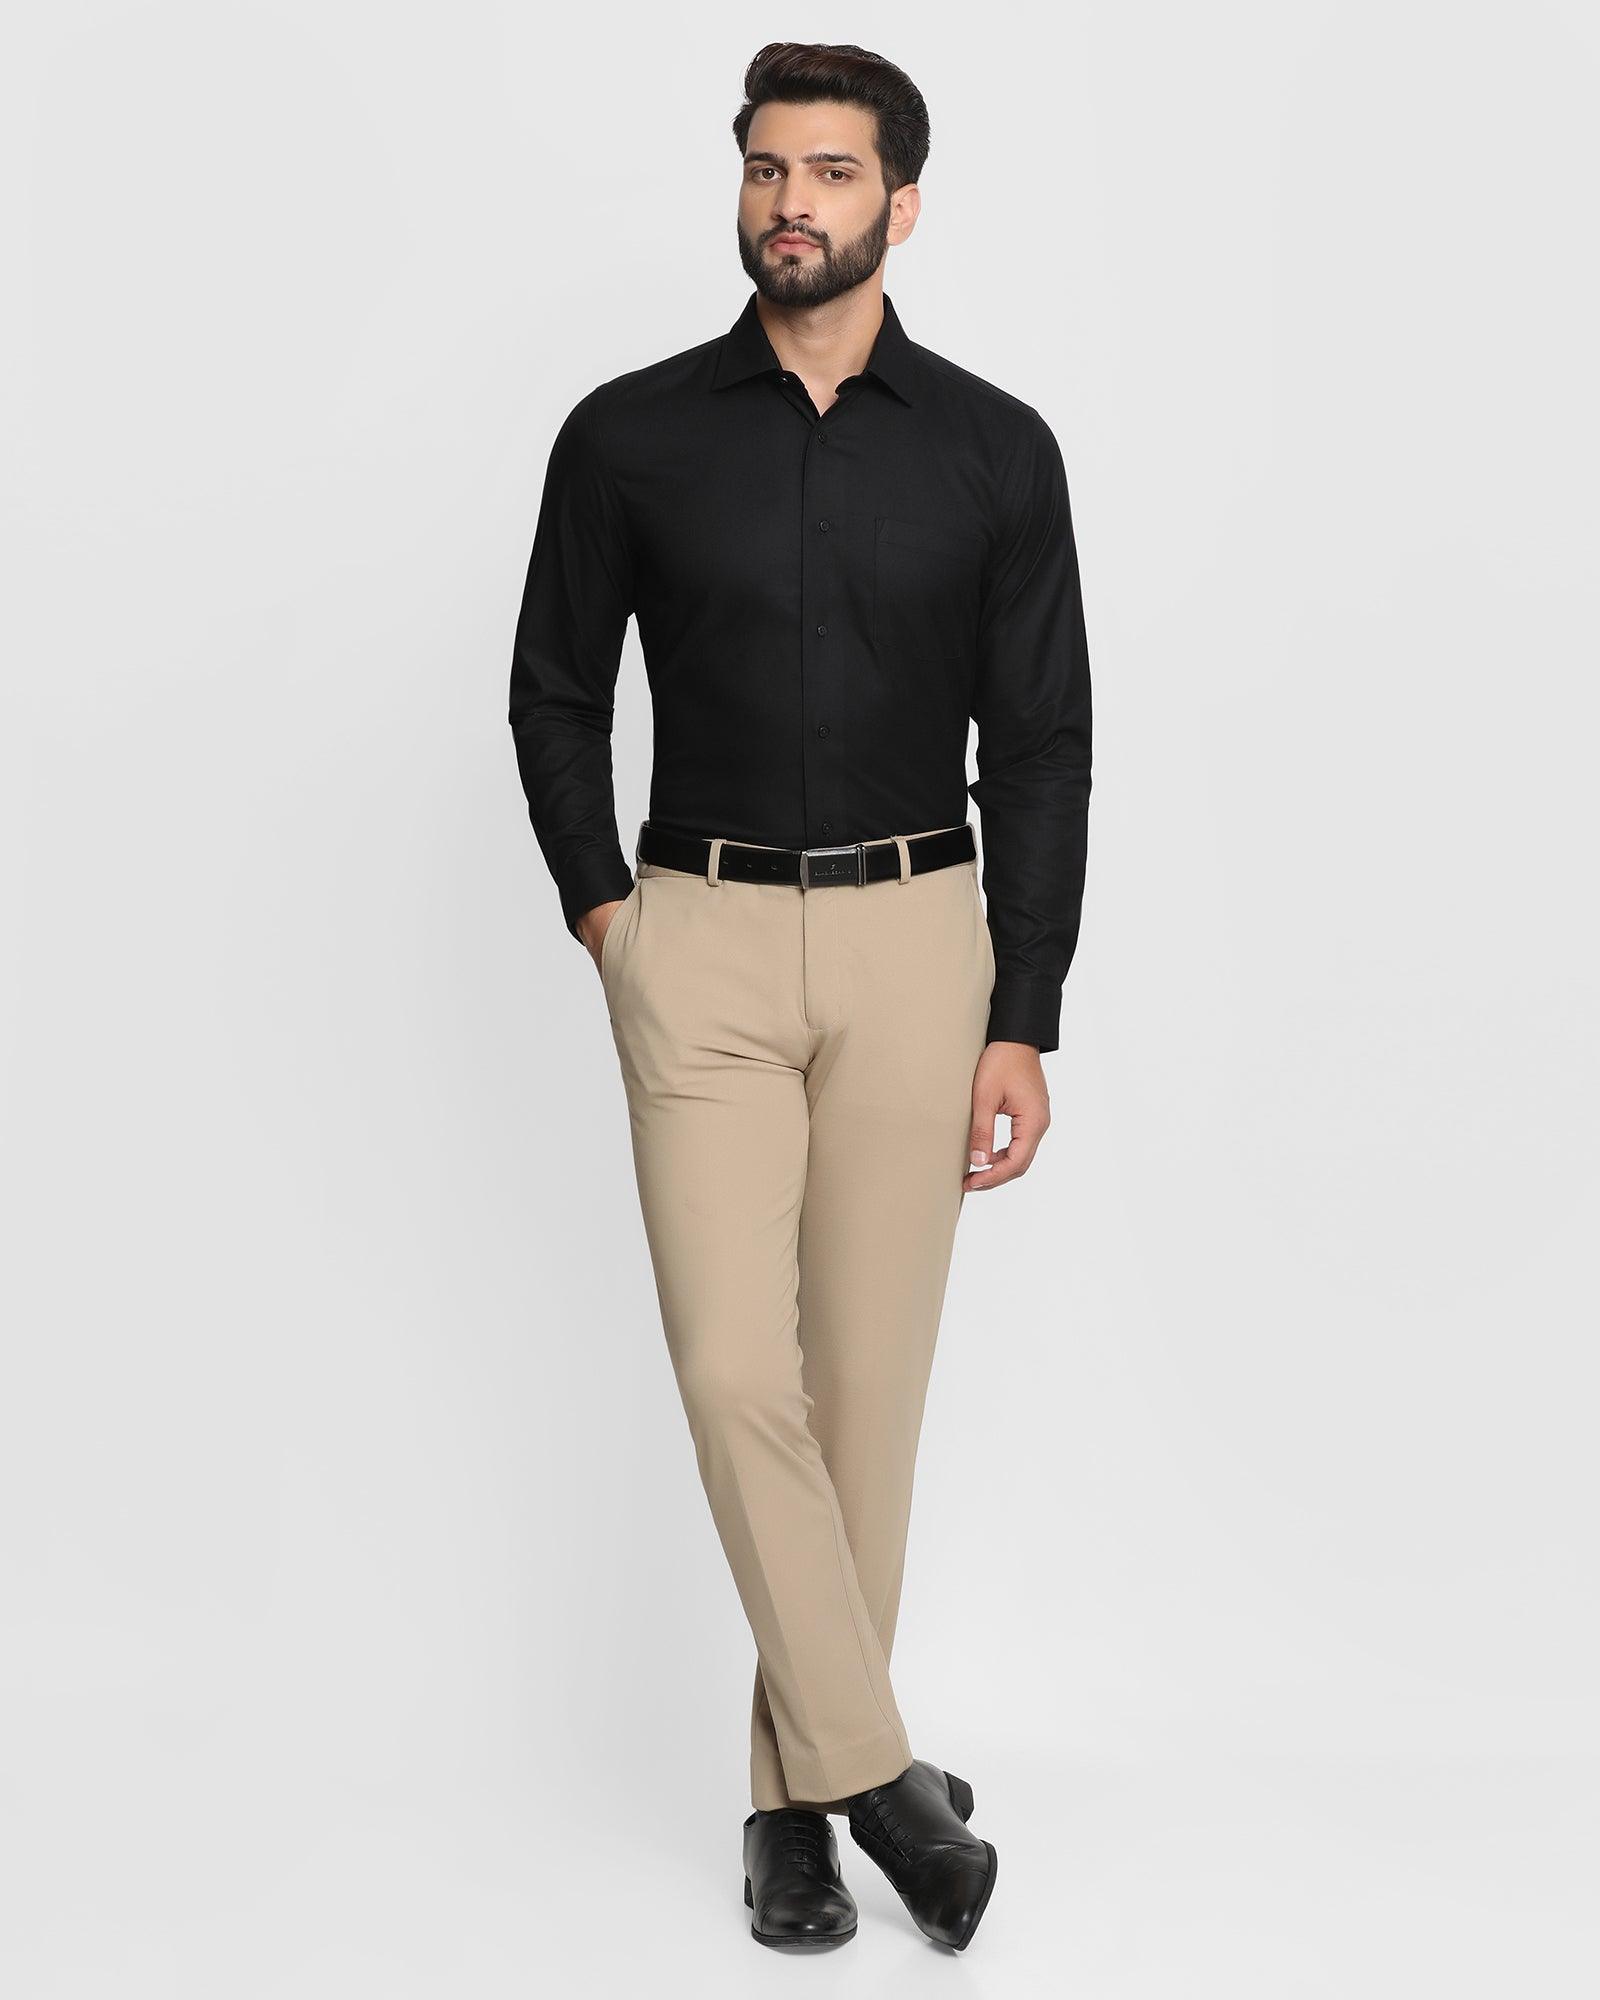 Men's Clearance - Clothes on Clearance - Express